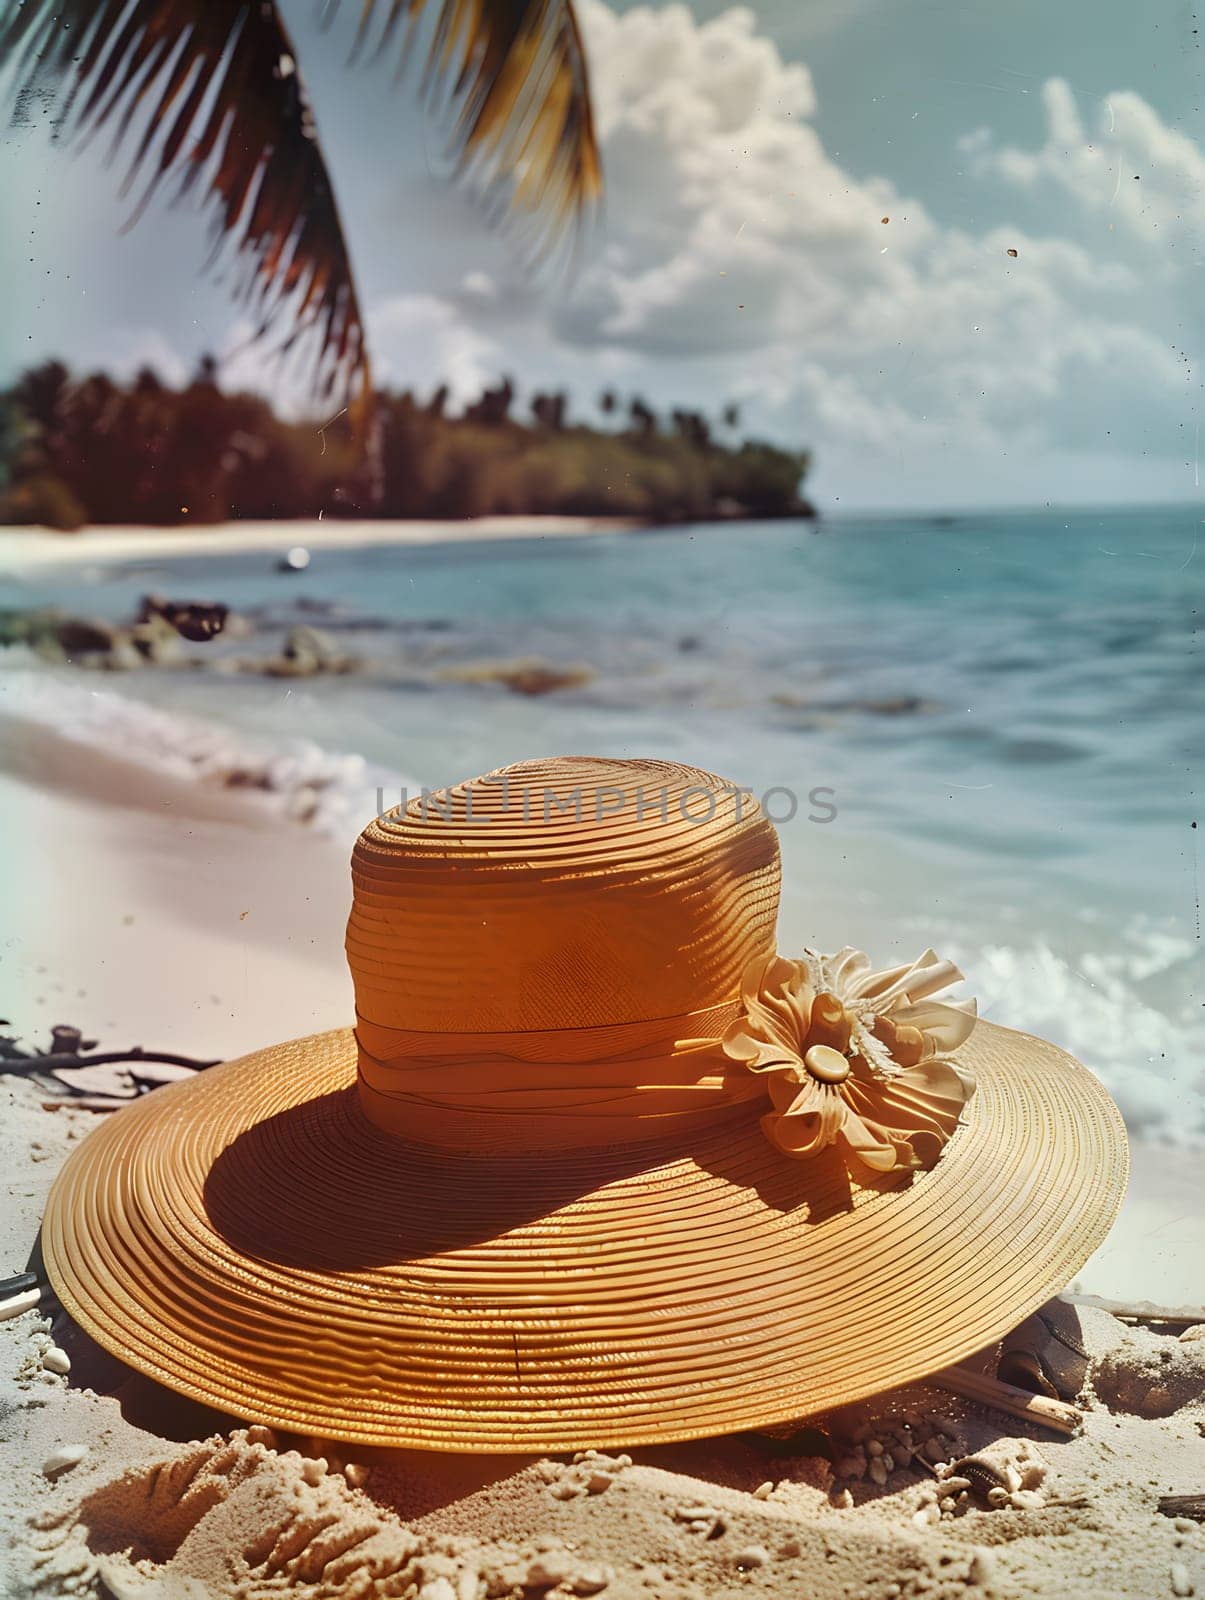 A hat with a flower rests on the sandy beach, under the blue sky and fluffy clouds. The tranquil scene is perfect for a travel photograph